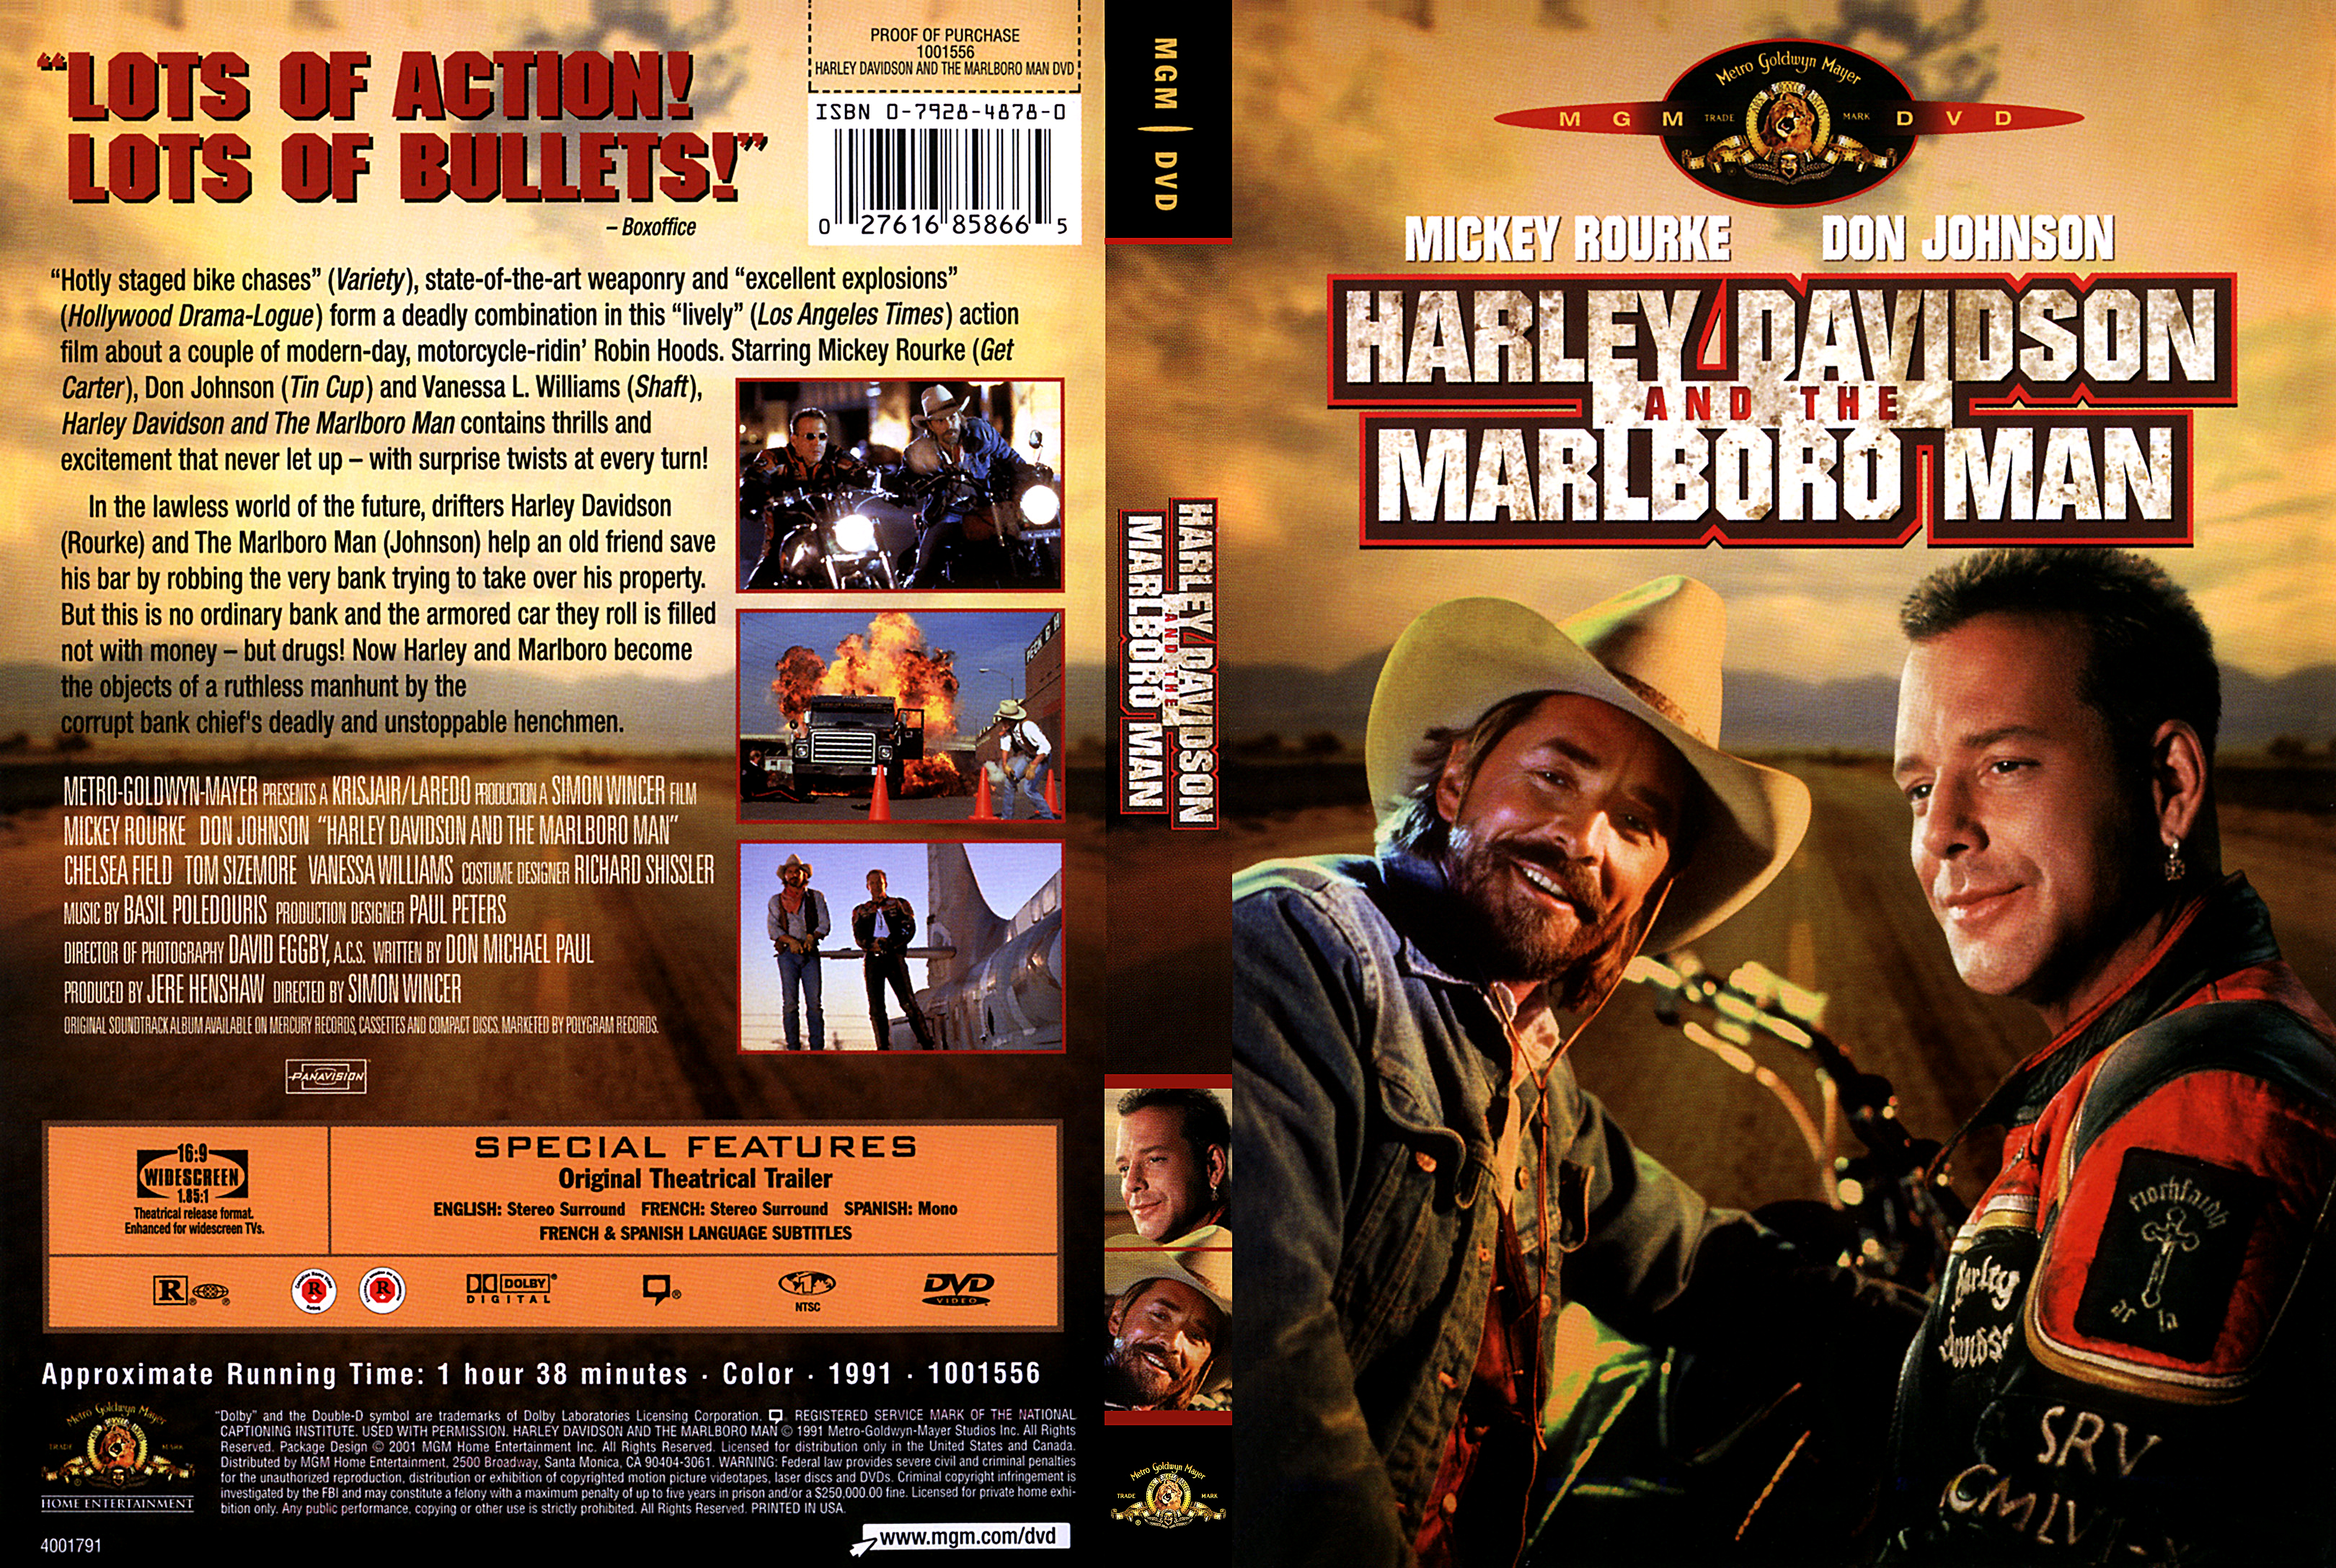 Harley Davidson And The Marlboro Man Dvd Covers Cover Century Over 500 000 Album Art Covers For Free